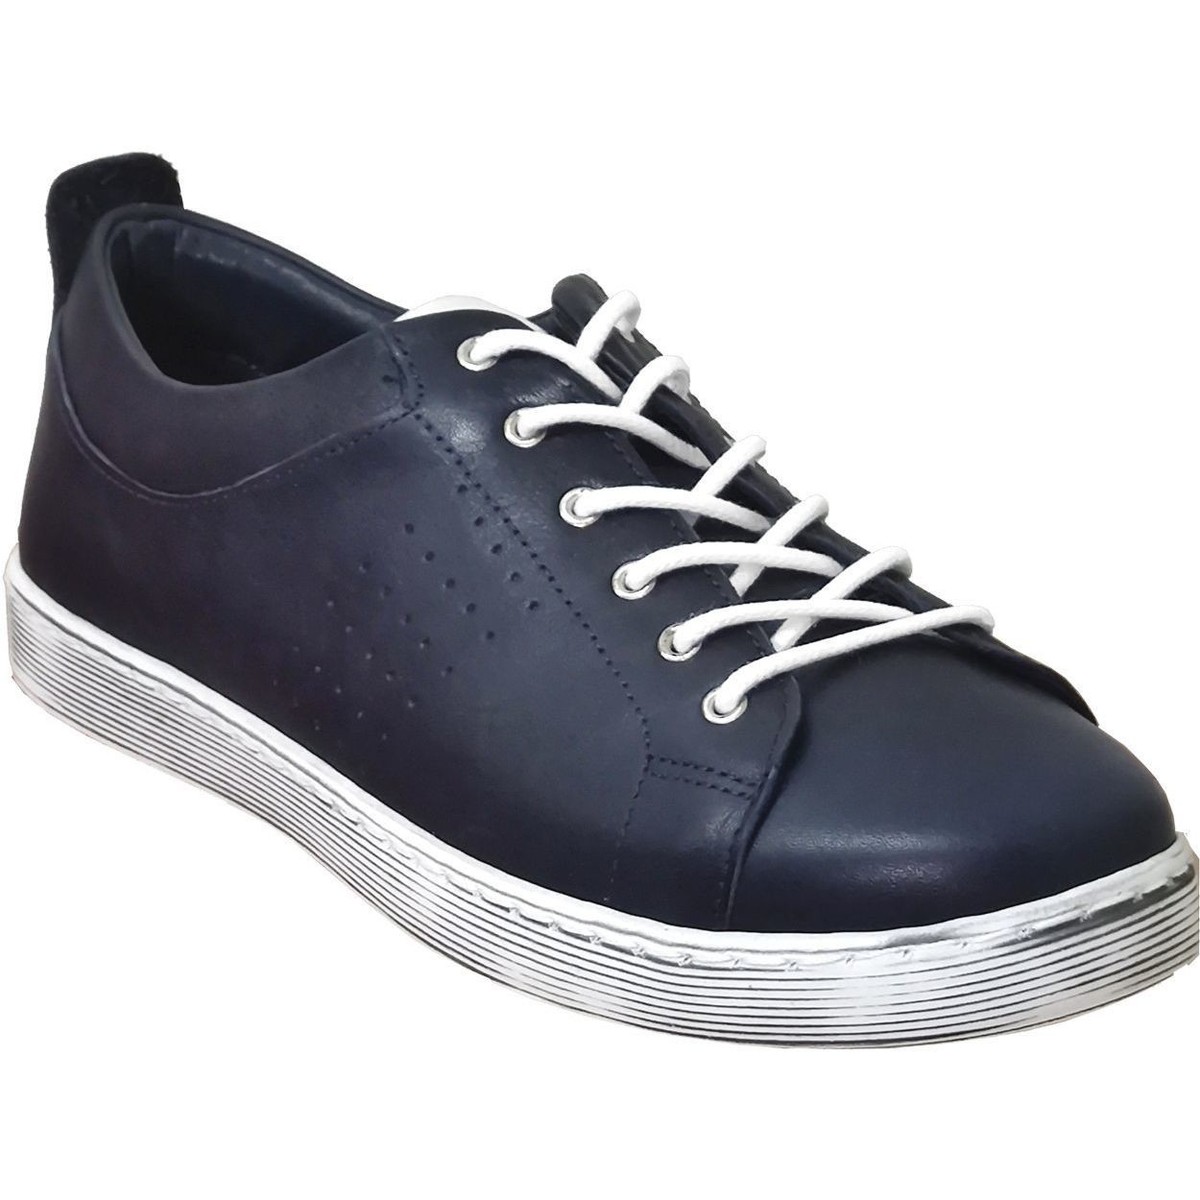 Xαμηλά Sneakers K.mary Absolut